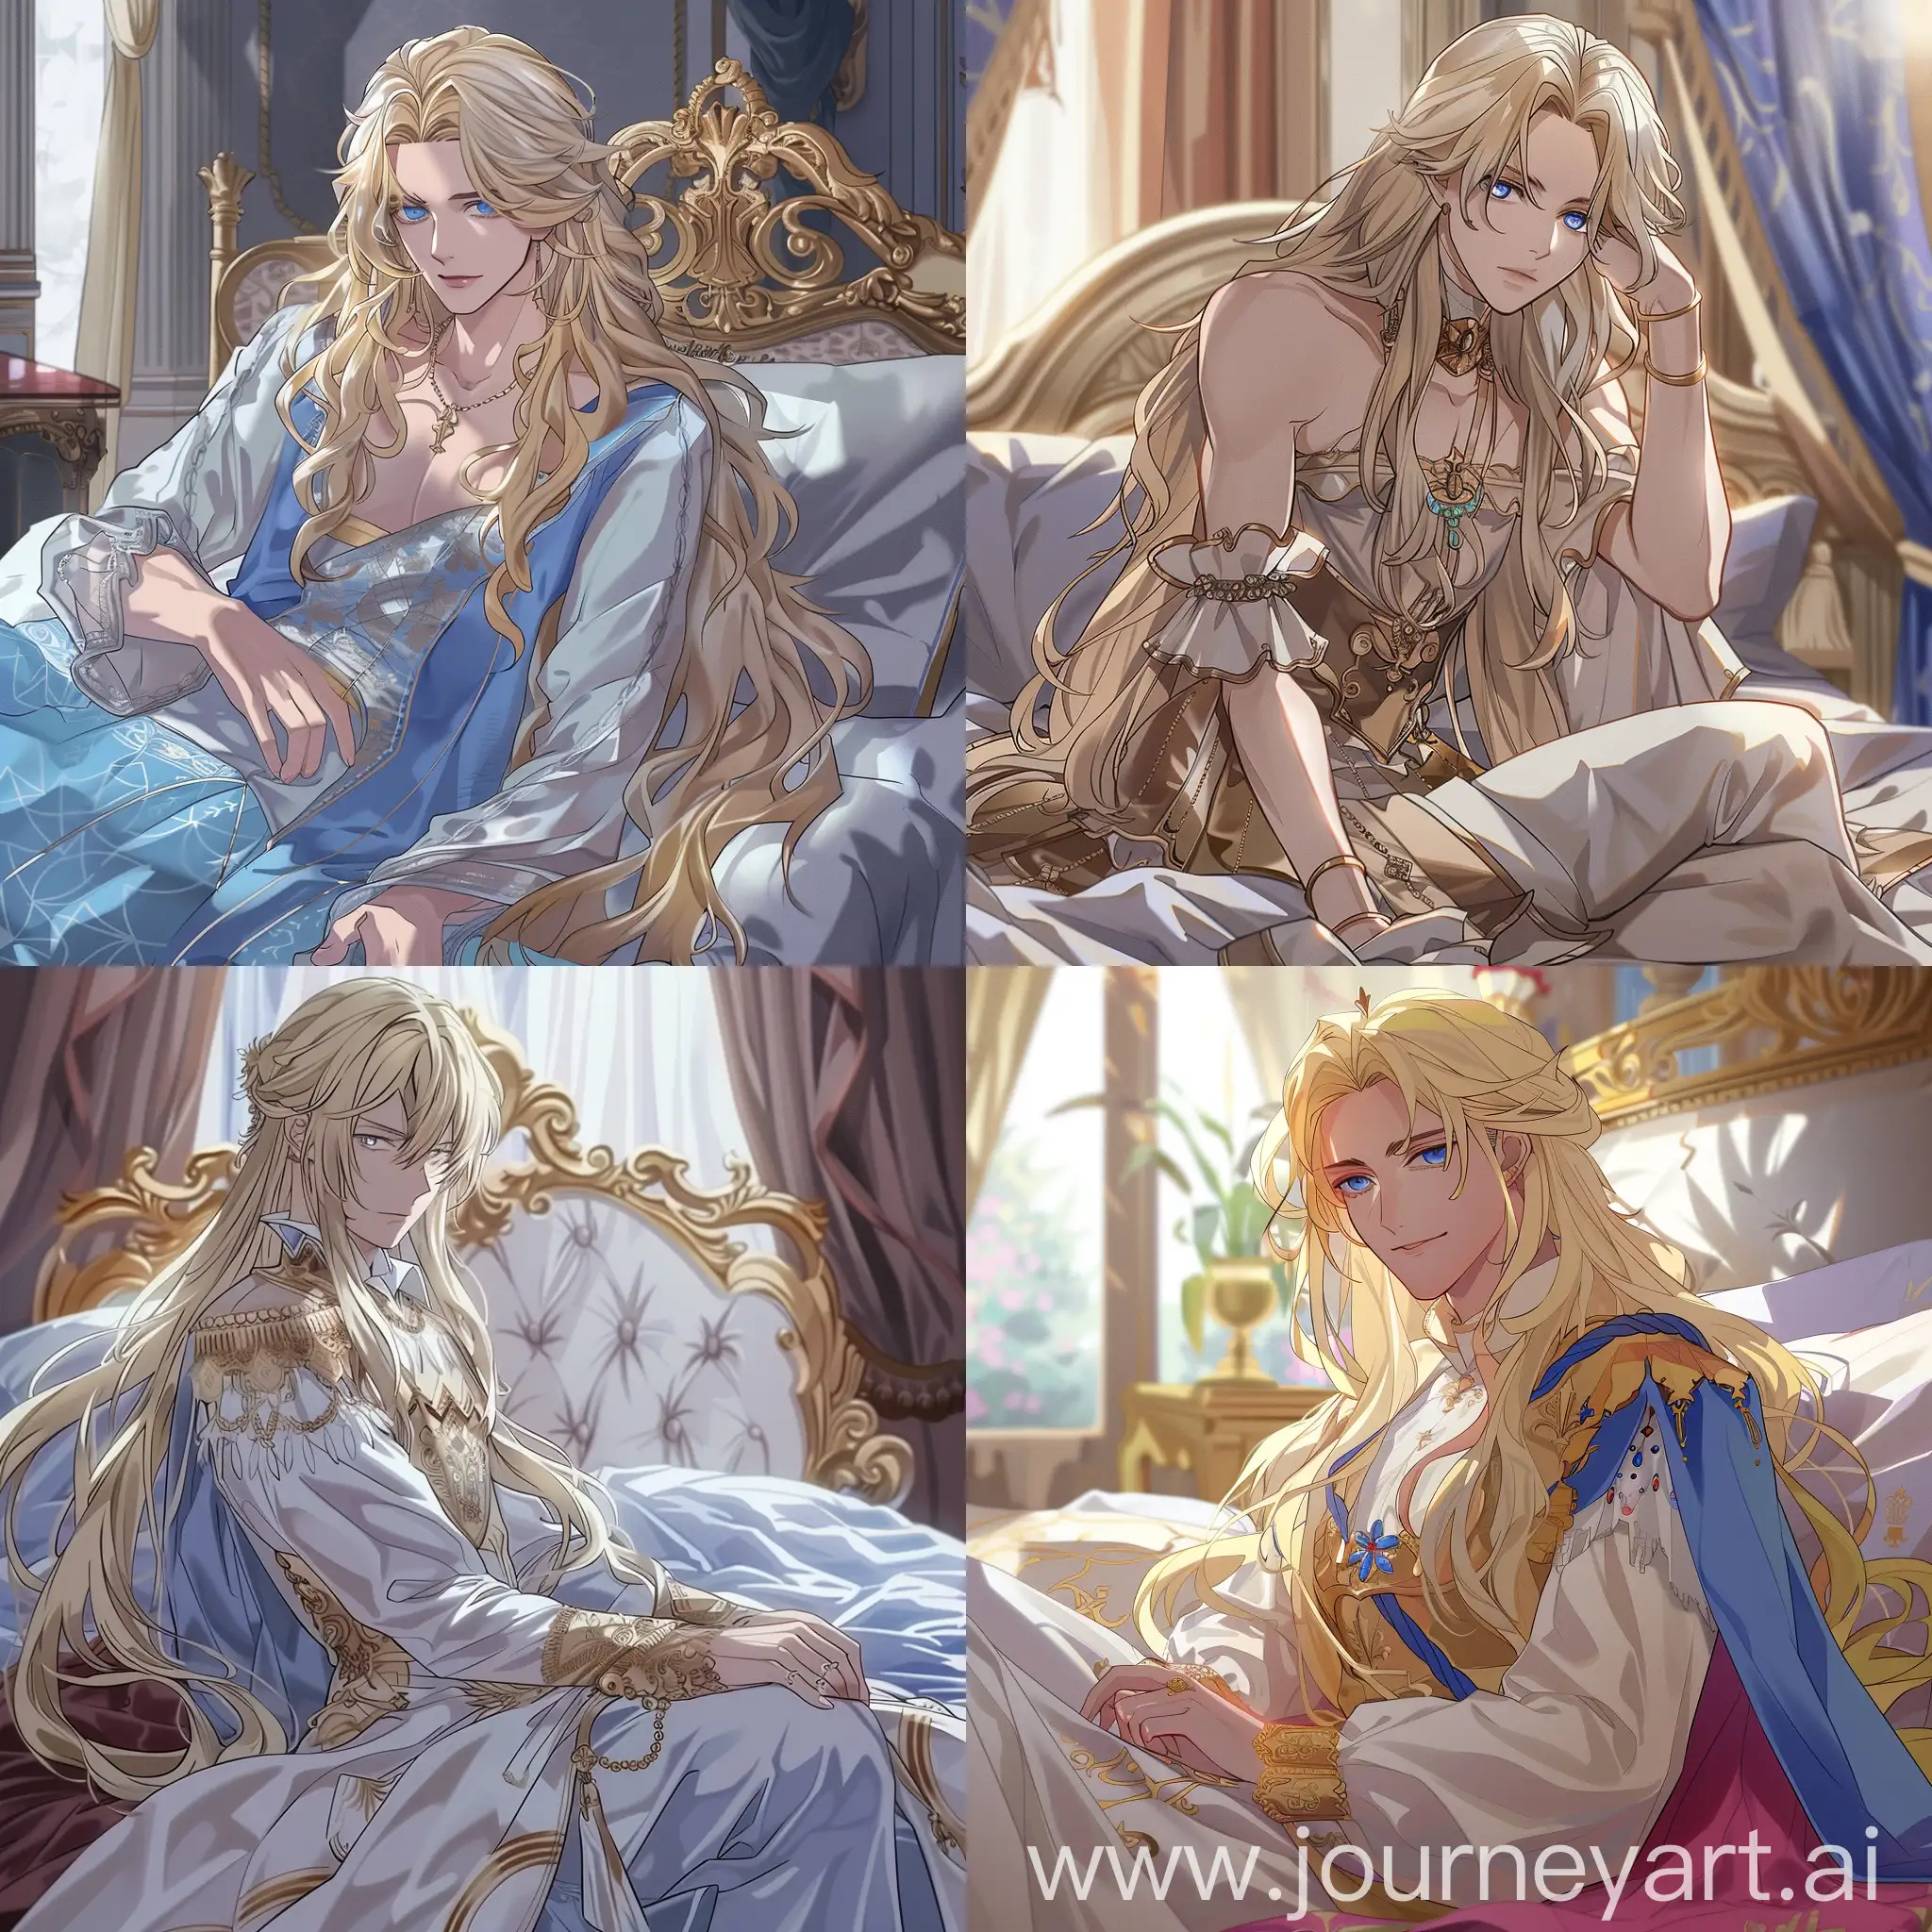 Young man, blonde, long hair, blue eyes, smooth white skin, in a royal female dress, on a bed, anime style